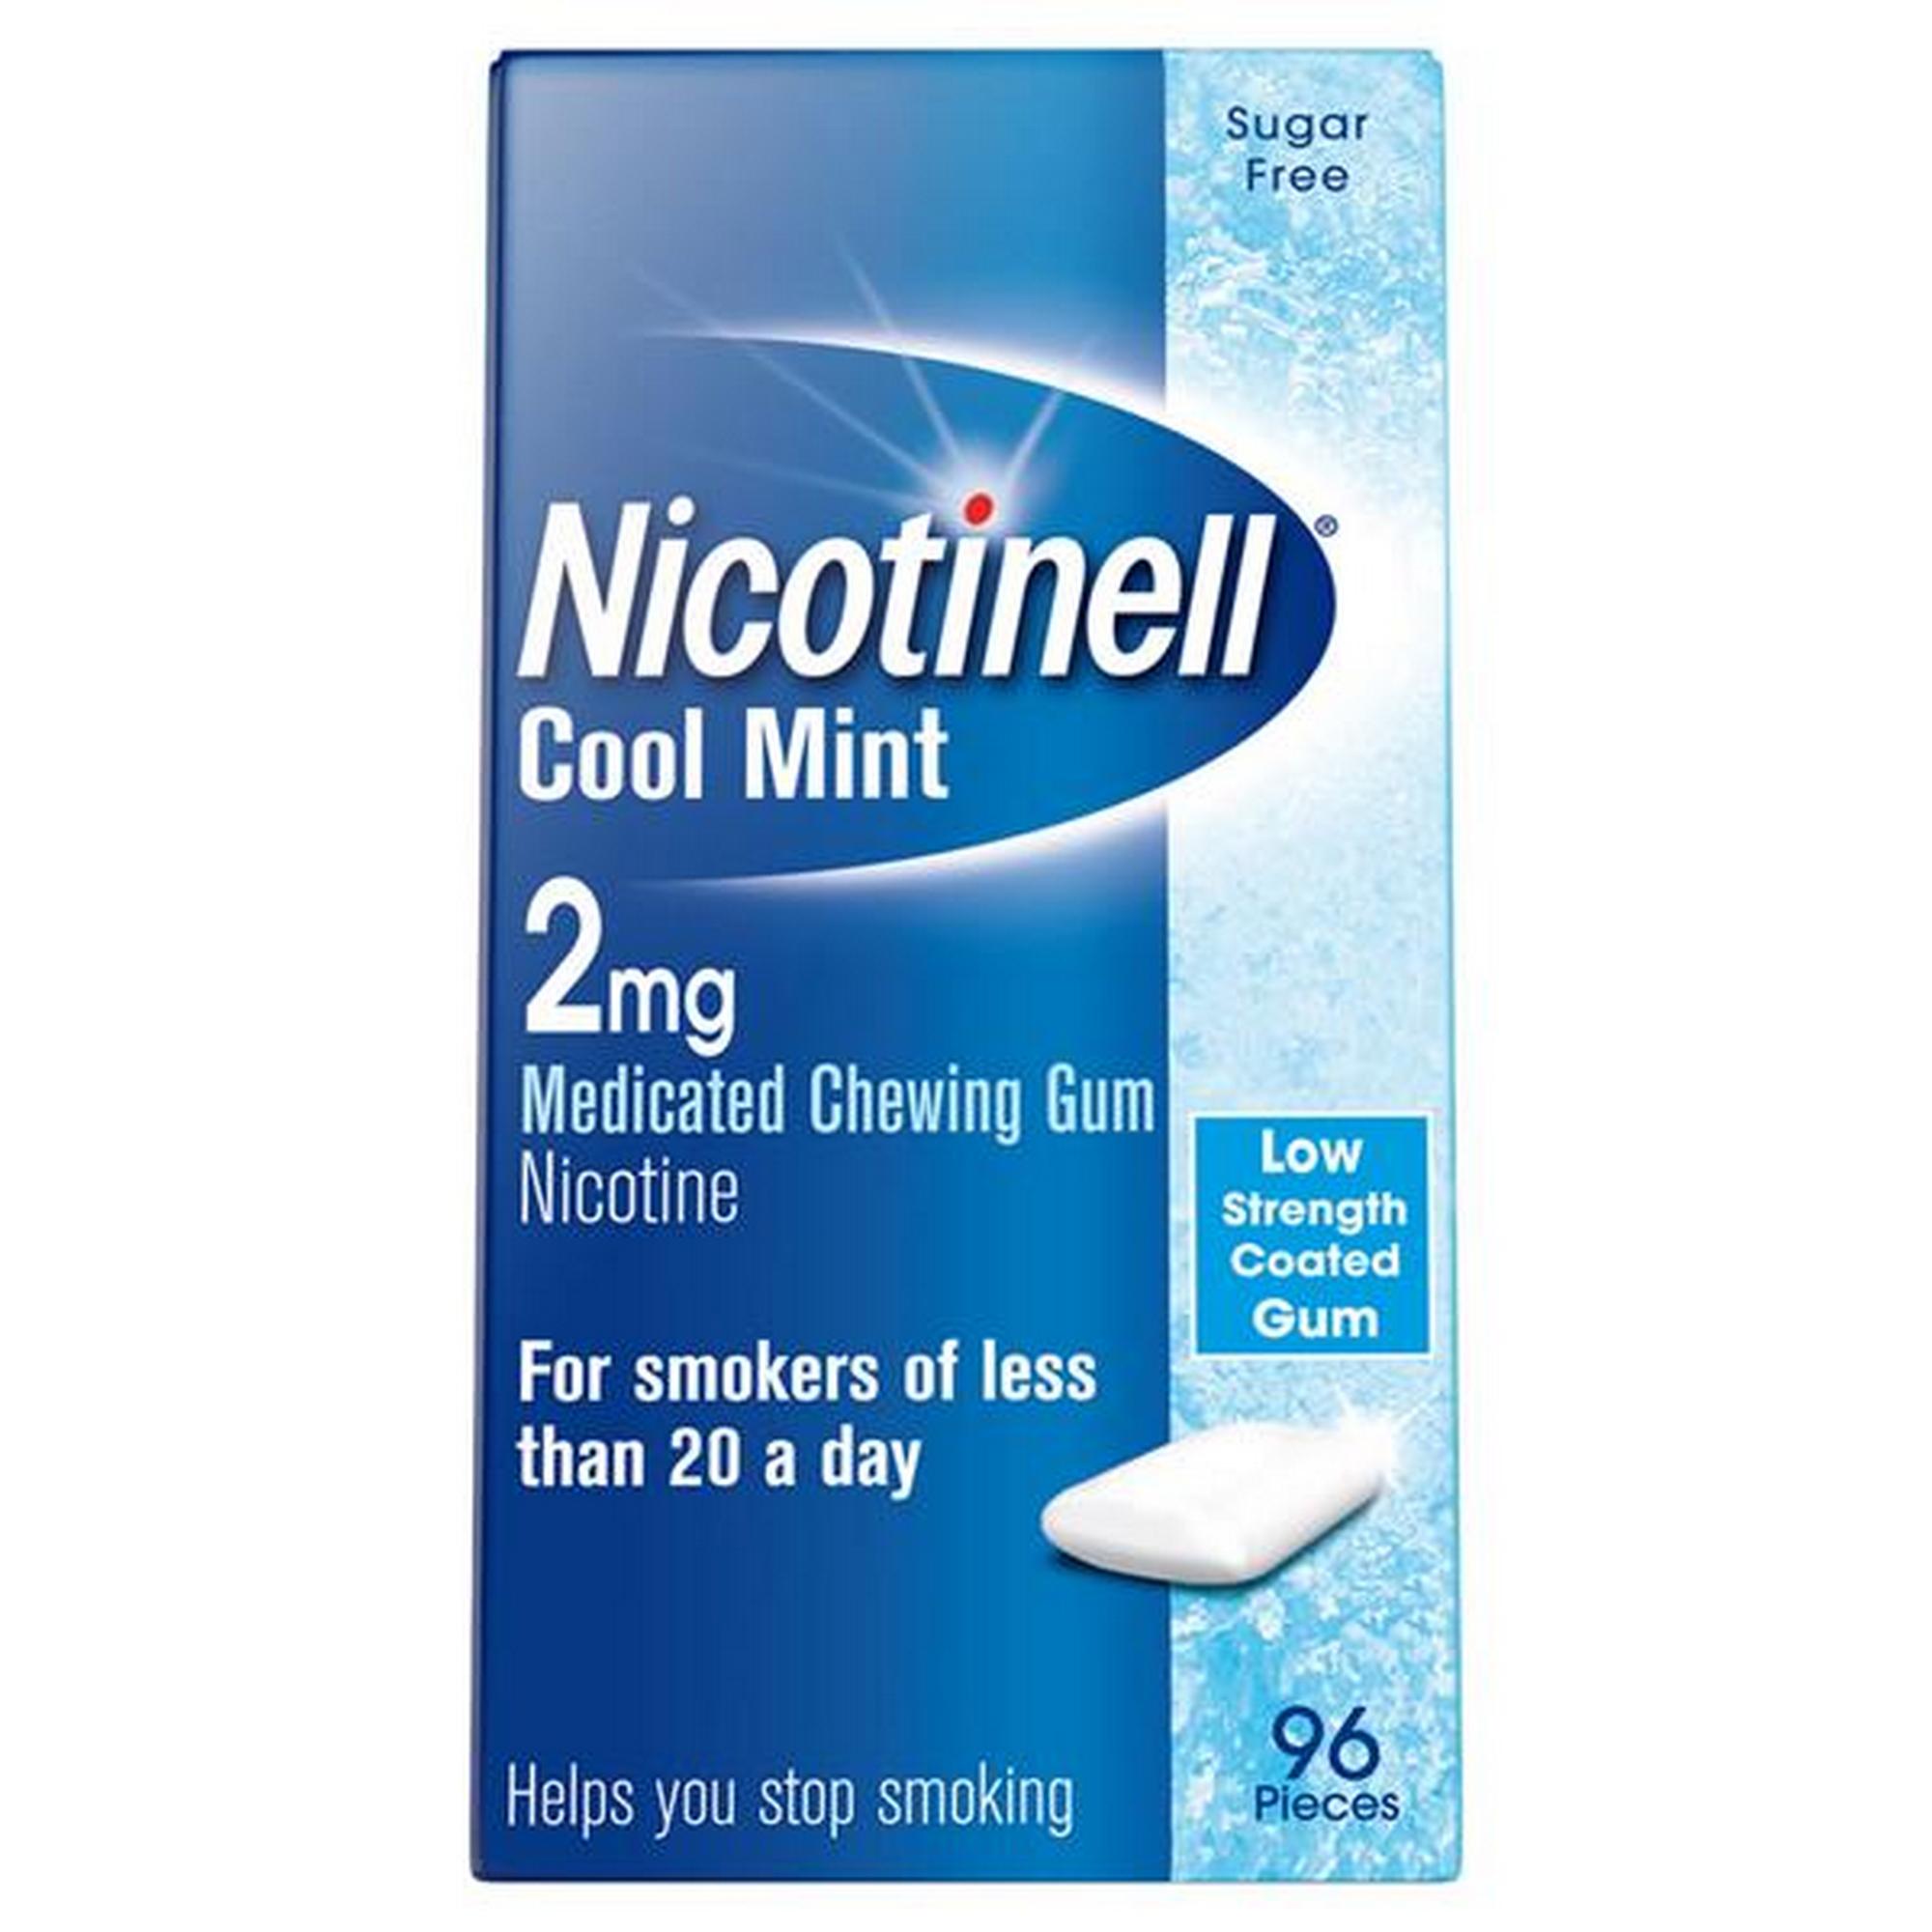 Nicotinell Cool Mint 2mg Medicated Chewing Gum – 96 Pack